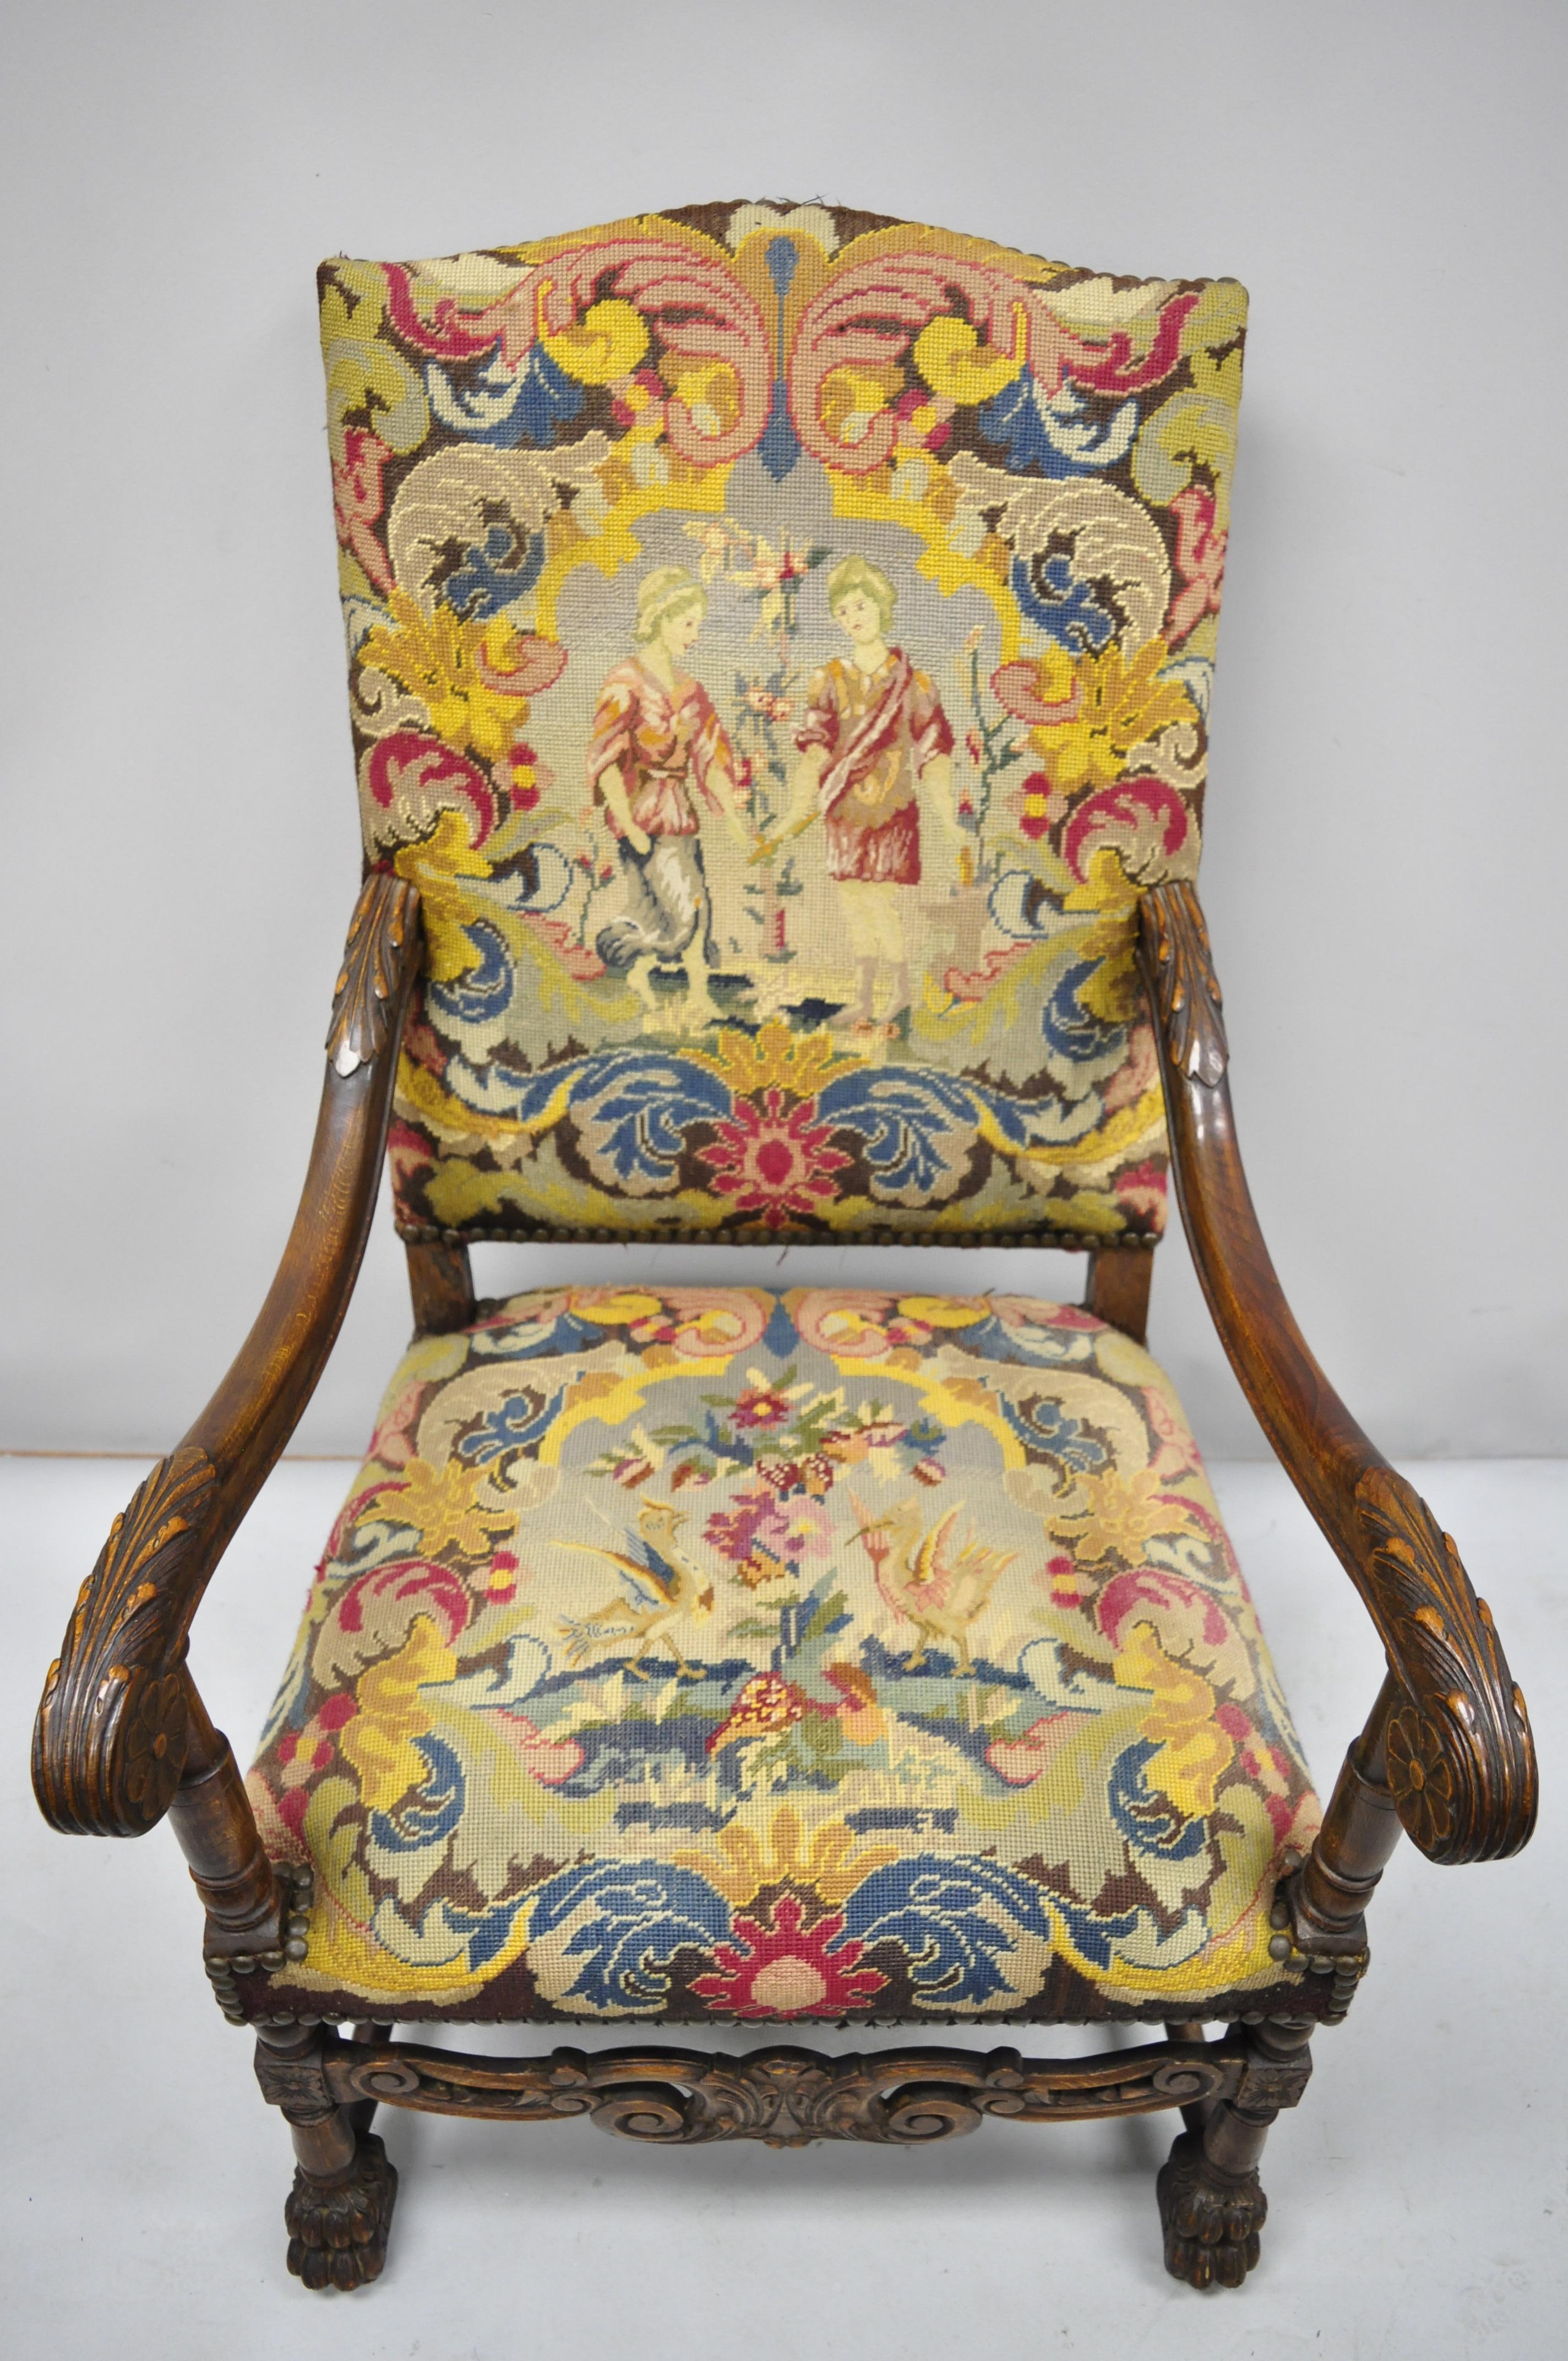 19th century French Renaissance needlepoint upholstery carved walnut throne armchair French Renaissance needlepoint upholstery carved walnut throne armchair. Item features figural needlepoint back and seat, solid wood construction, finely carved